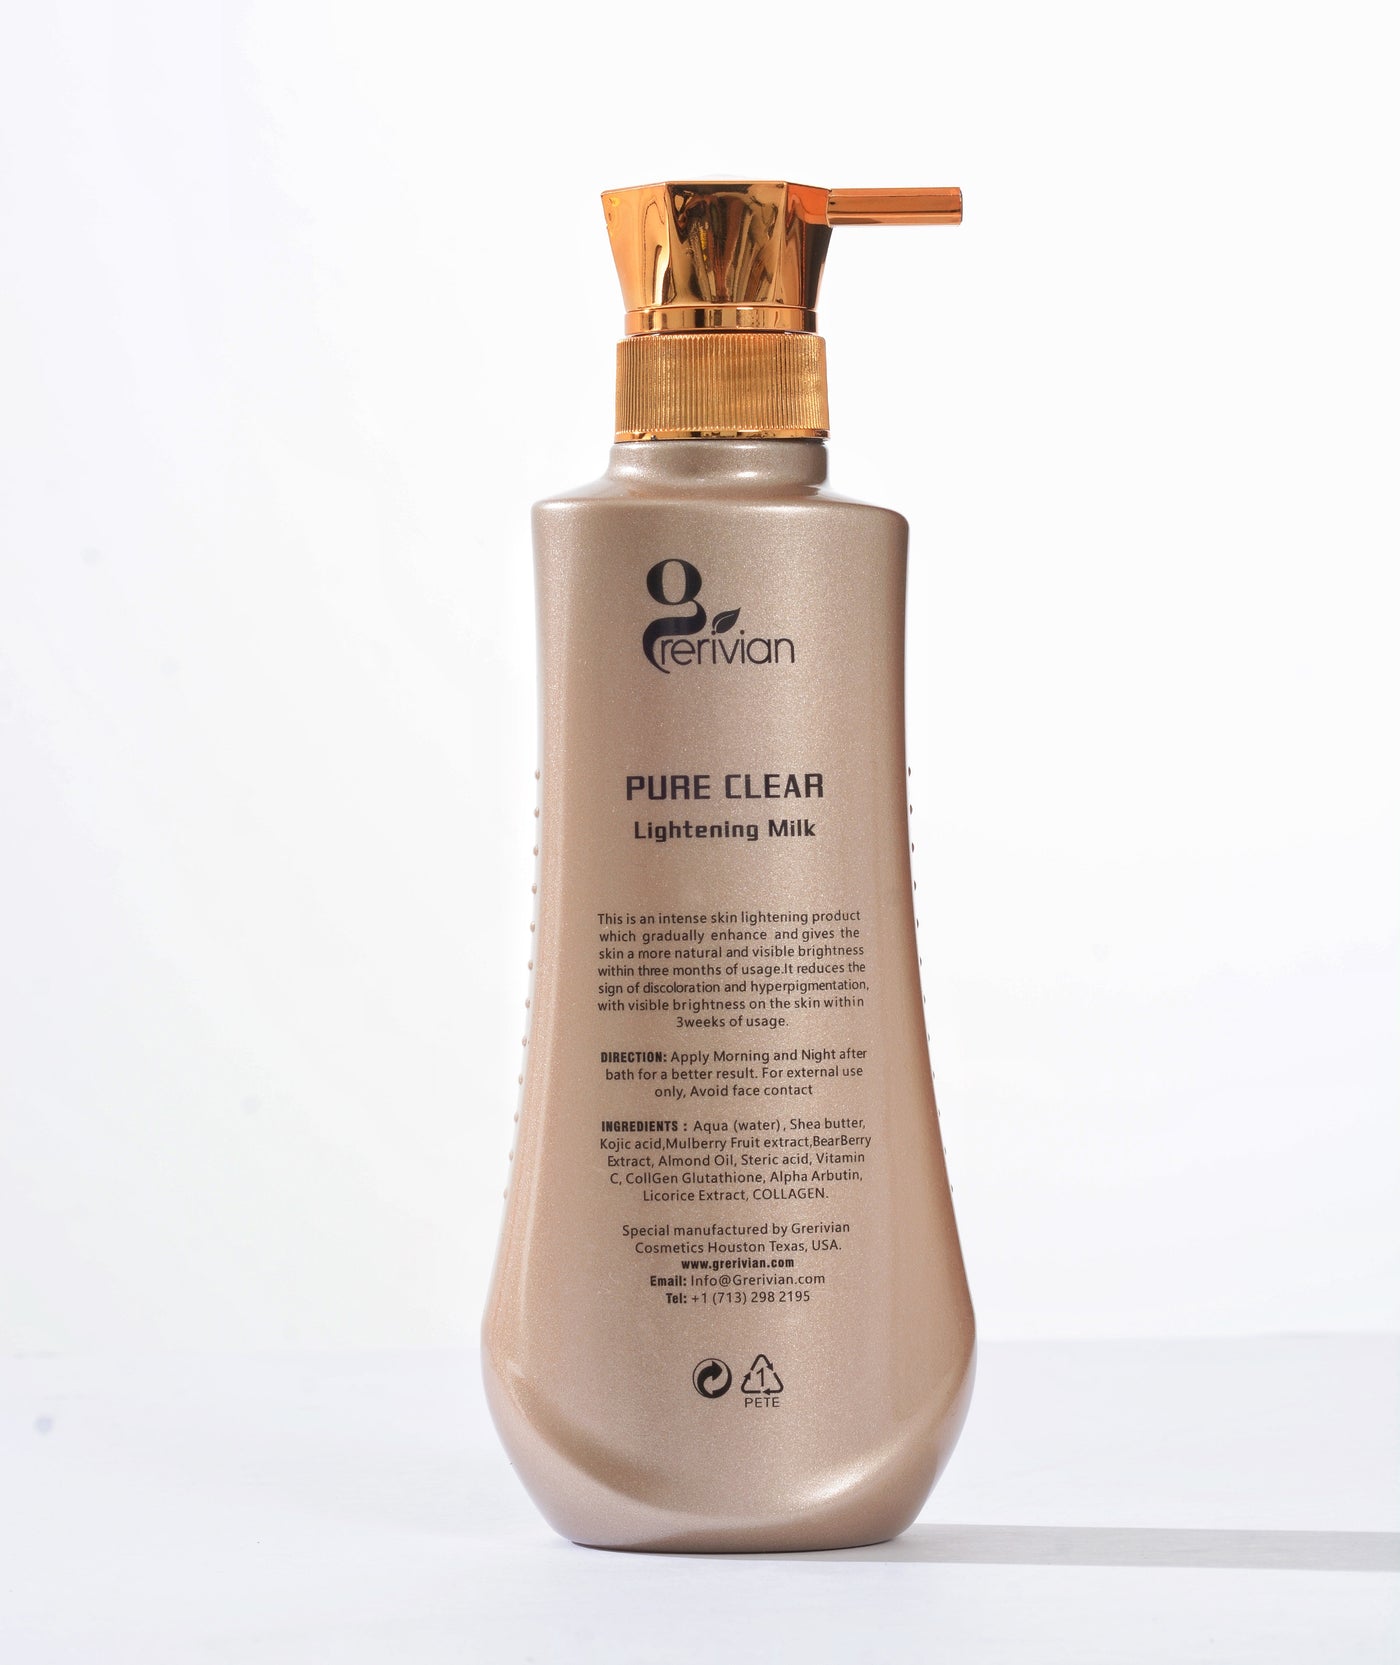 Grerivian PURE CLEAR WHITENING  (Body Lotion ONLY) 500ML - GRERIVIAN COSMETICS